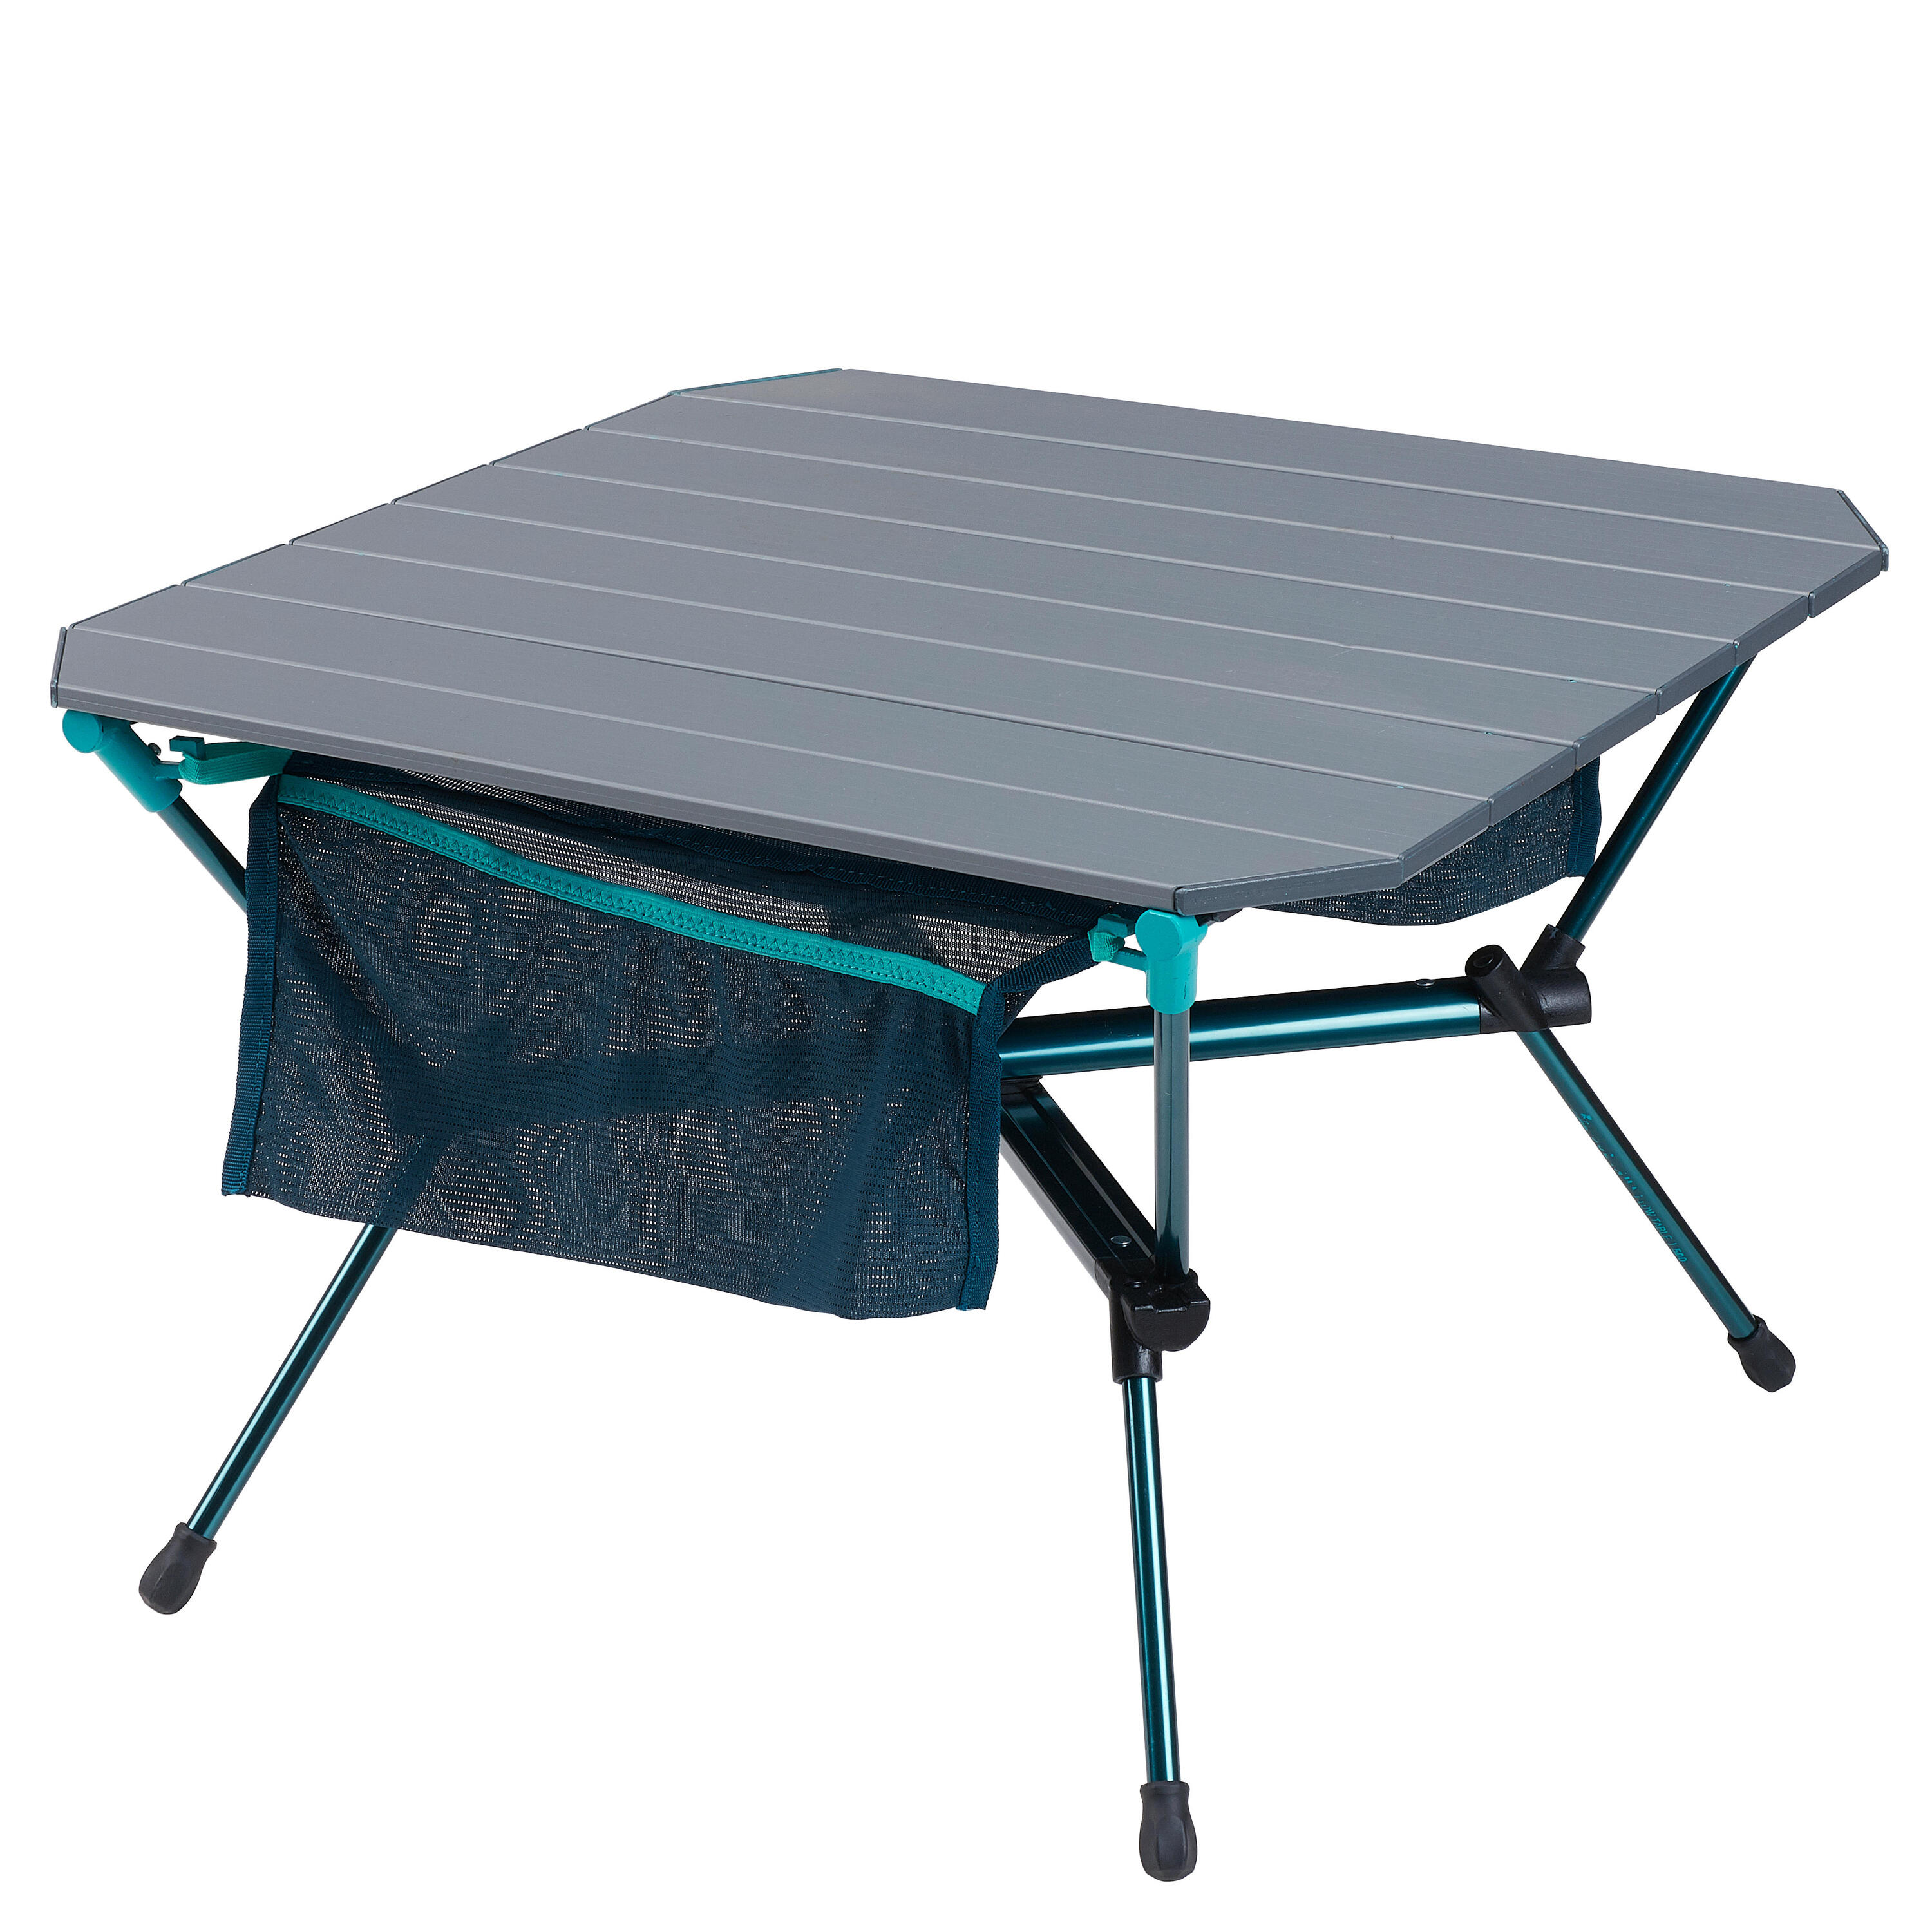 FOLDING CAMPING TABLE - MH500 9/11